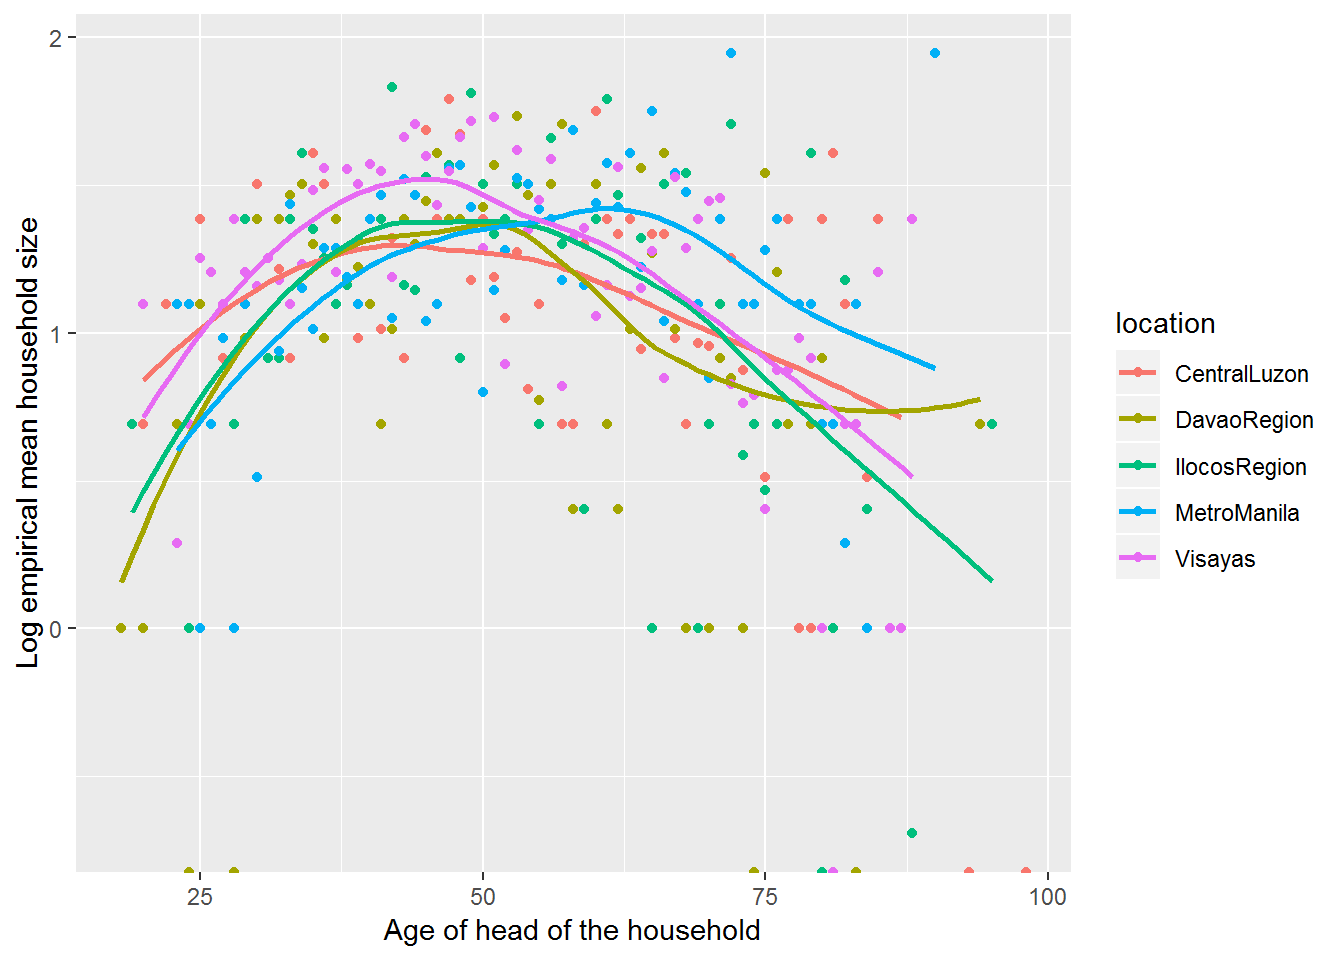 Empirical log of the mean household sizes vs. age of the head of household, with loess smoother by region.